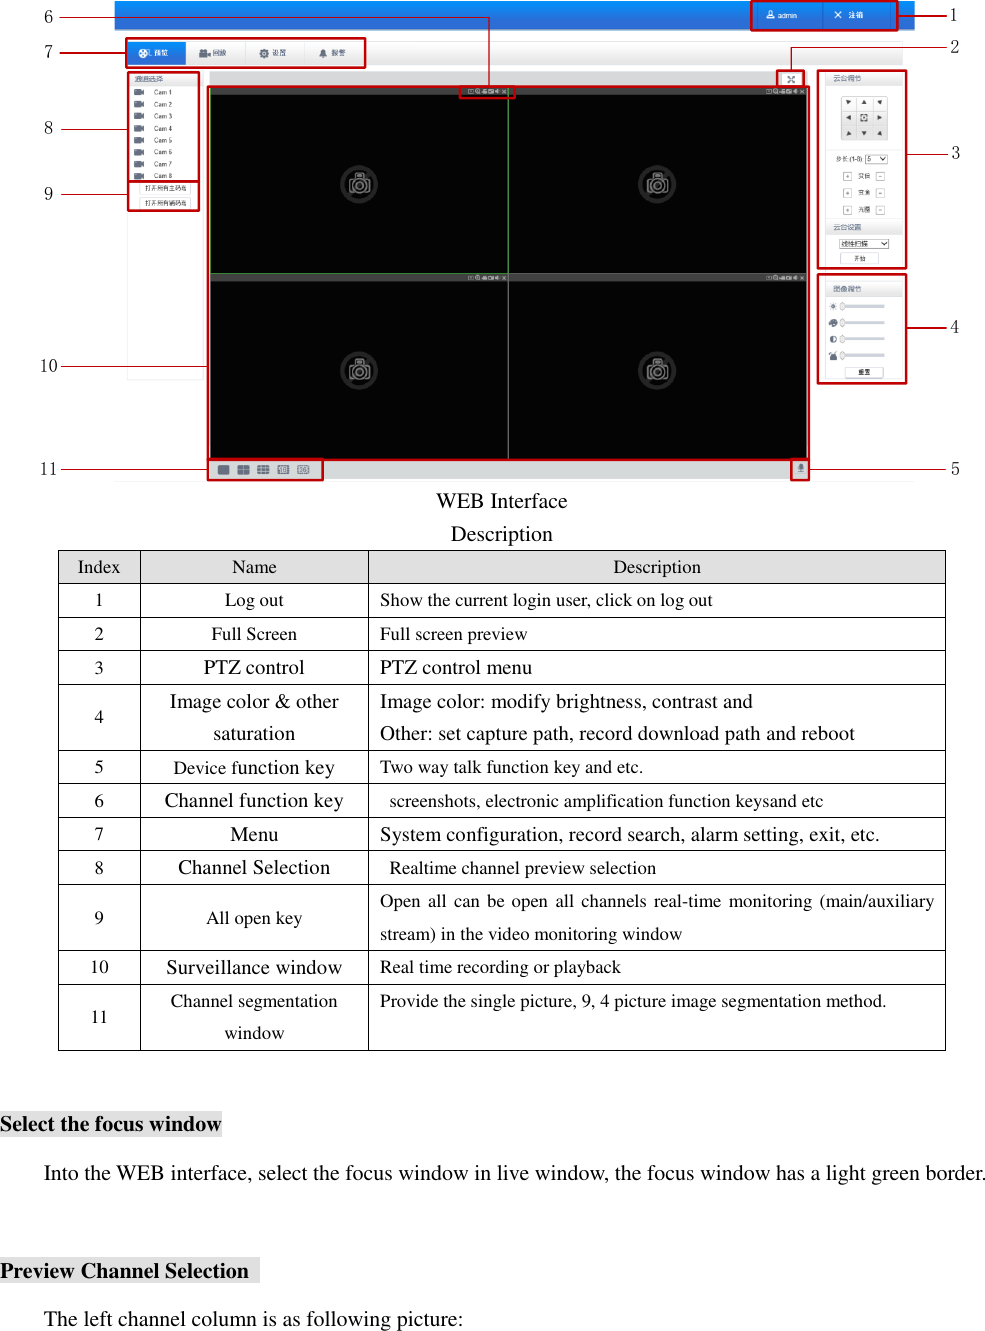 Page 69 of HANGZHOU ZENO VIDEOPARK IMPORT and EXPORT ZN-NC-CBR Smart WiFi Camera User Manual The Manual of Digital Video Recorder